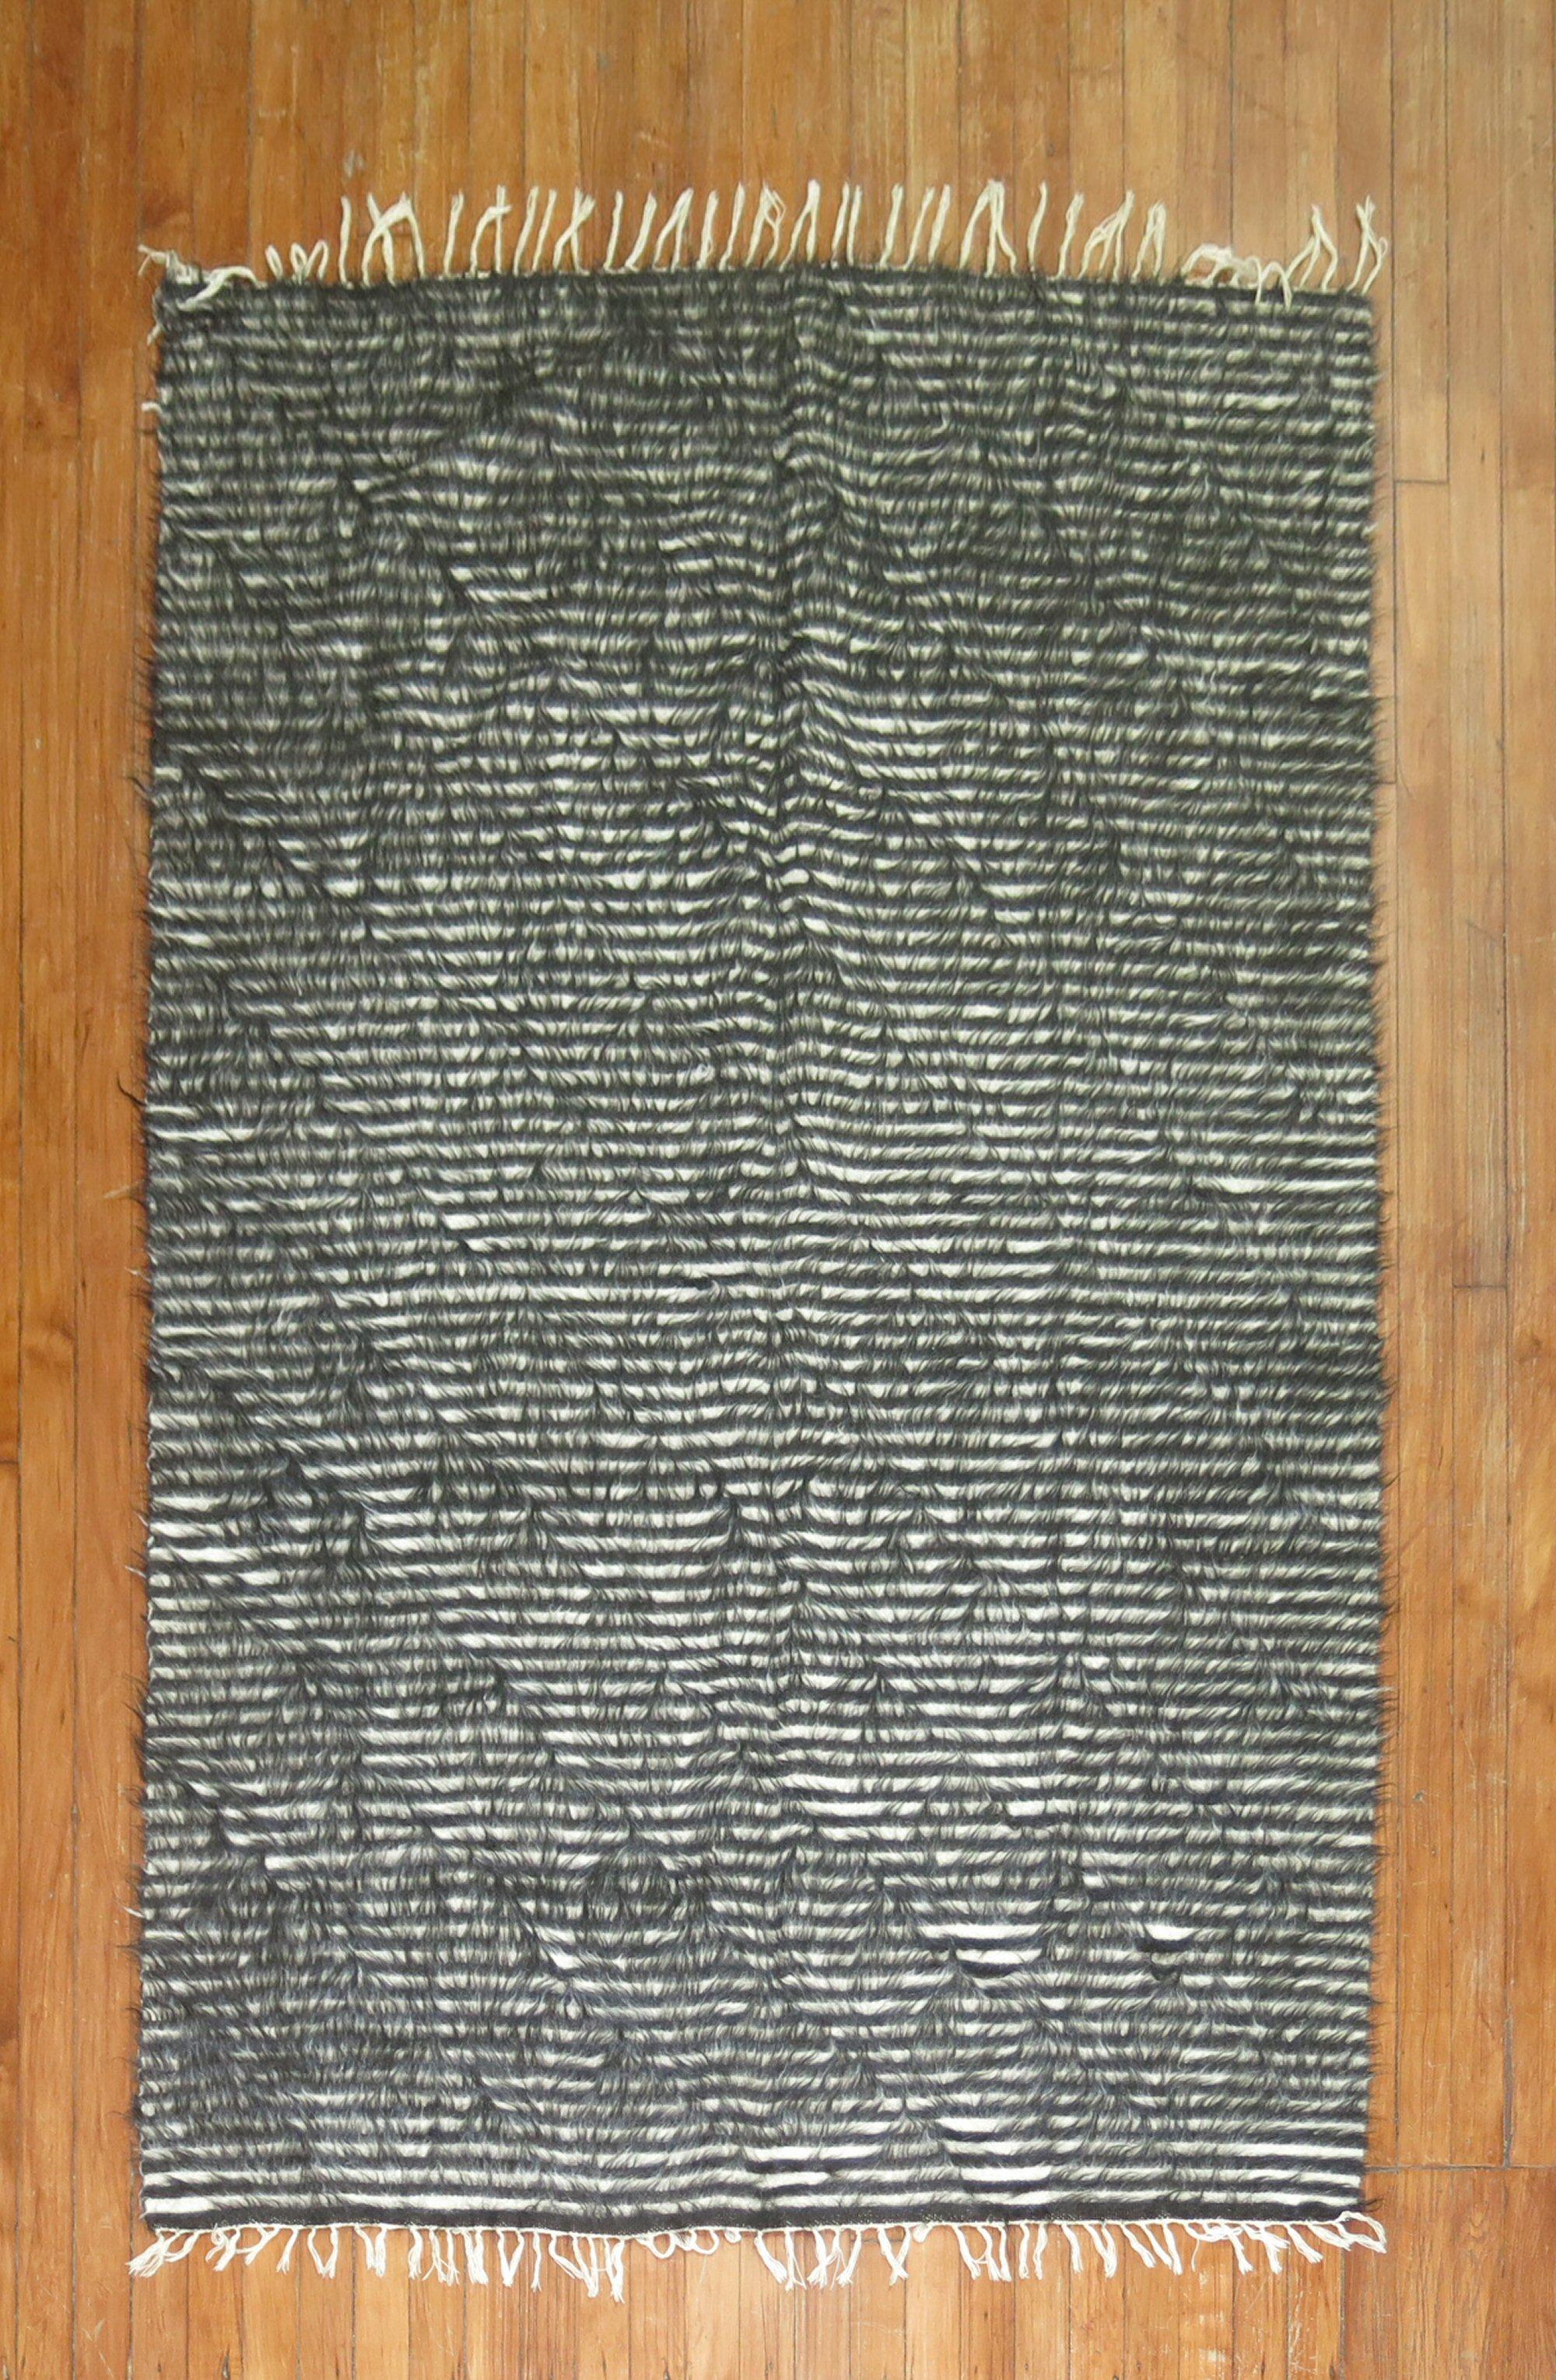 Vintage Mohair rug with a striped design in black and white

Measures: 4'3'' x 6'7''.